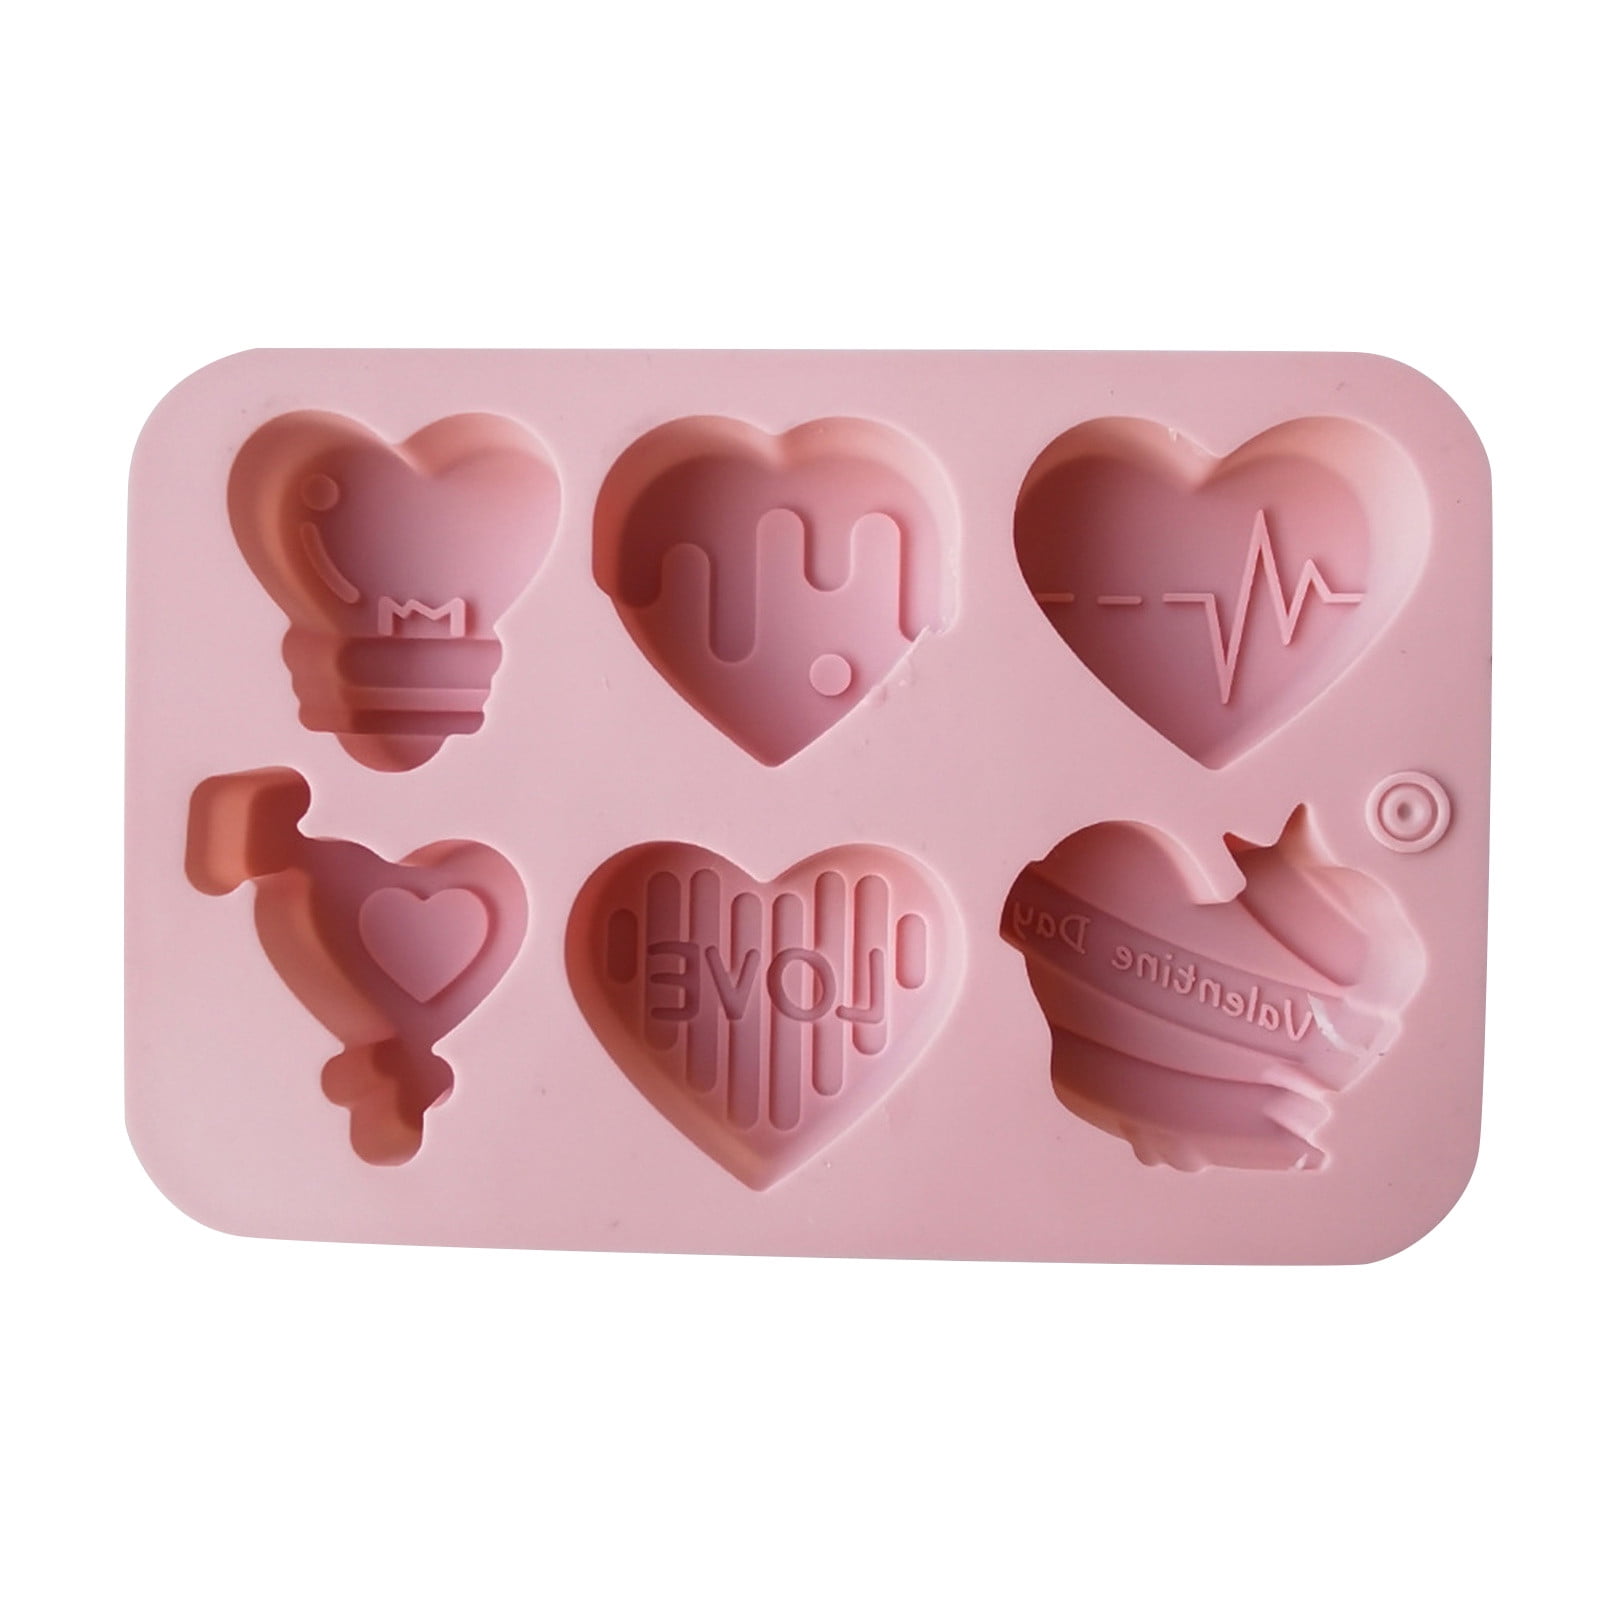 Lbecley Small Metal Pans for Baking Silicone Tool Birthday Cake Silicone Molds Baking Molds Making for Candy Chocolate DIY Chocolate Cake Mould Loaf